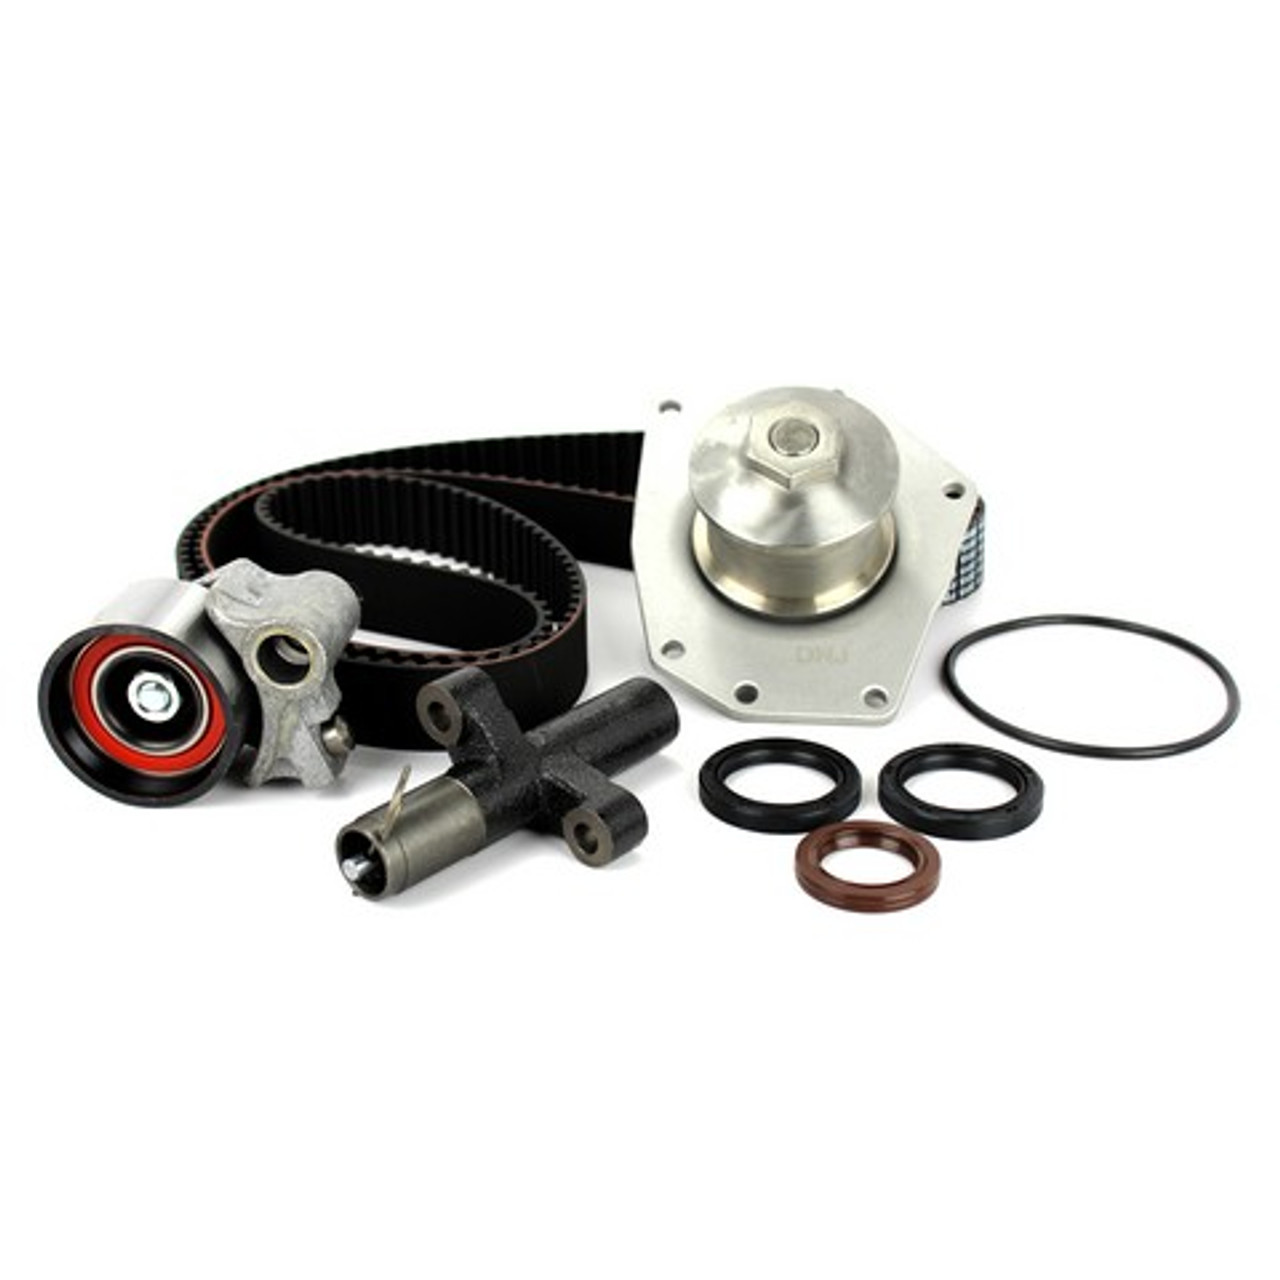 Timing Belt Kit with Water Pump 3.5L 2002 Chrysler Prowler - TBK143WP.23